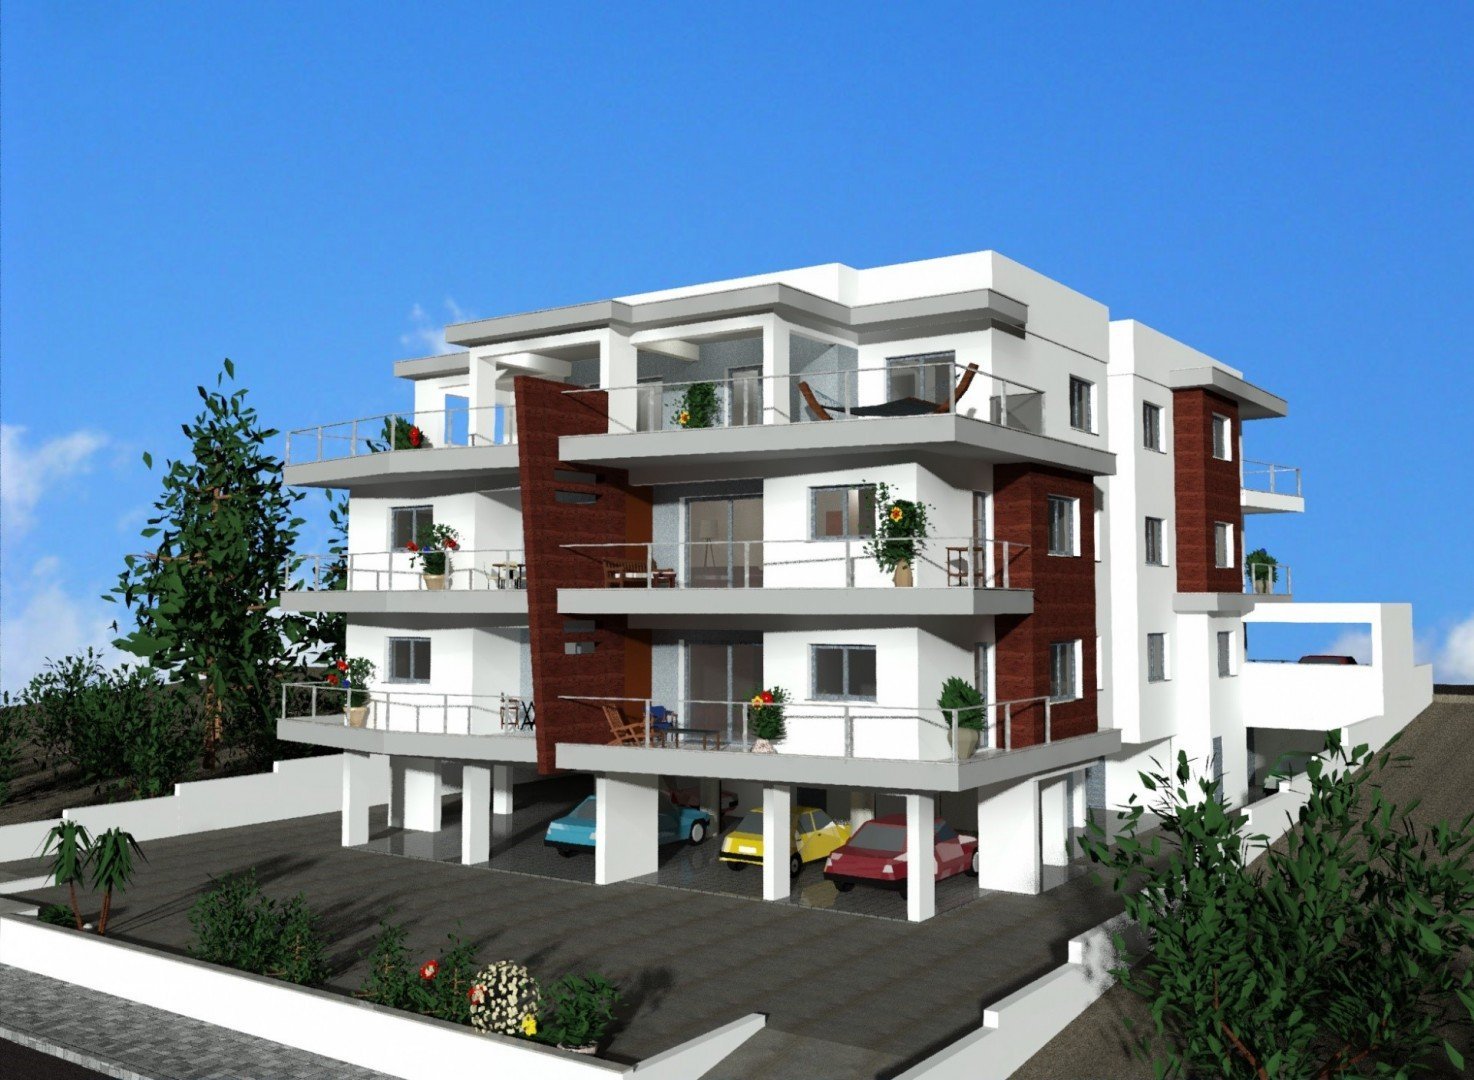 3 Bedroom Apartment for Sale in Limassol – Kapsalos